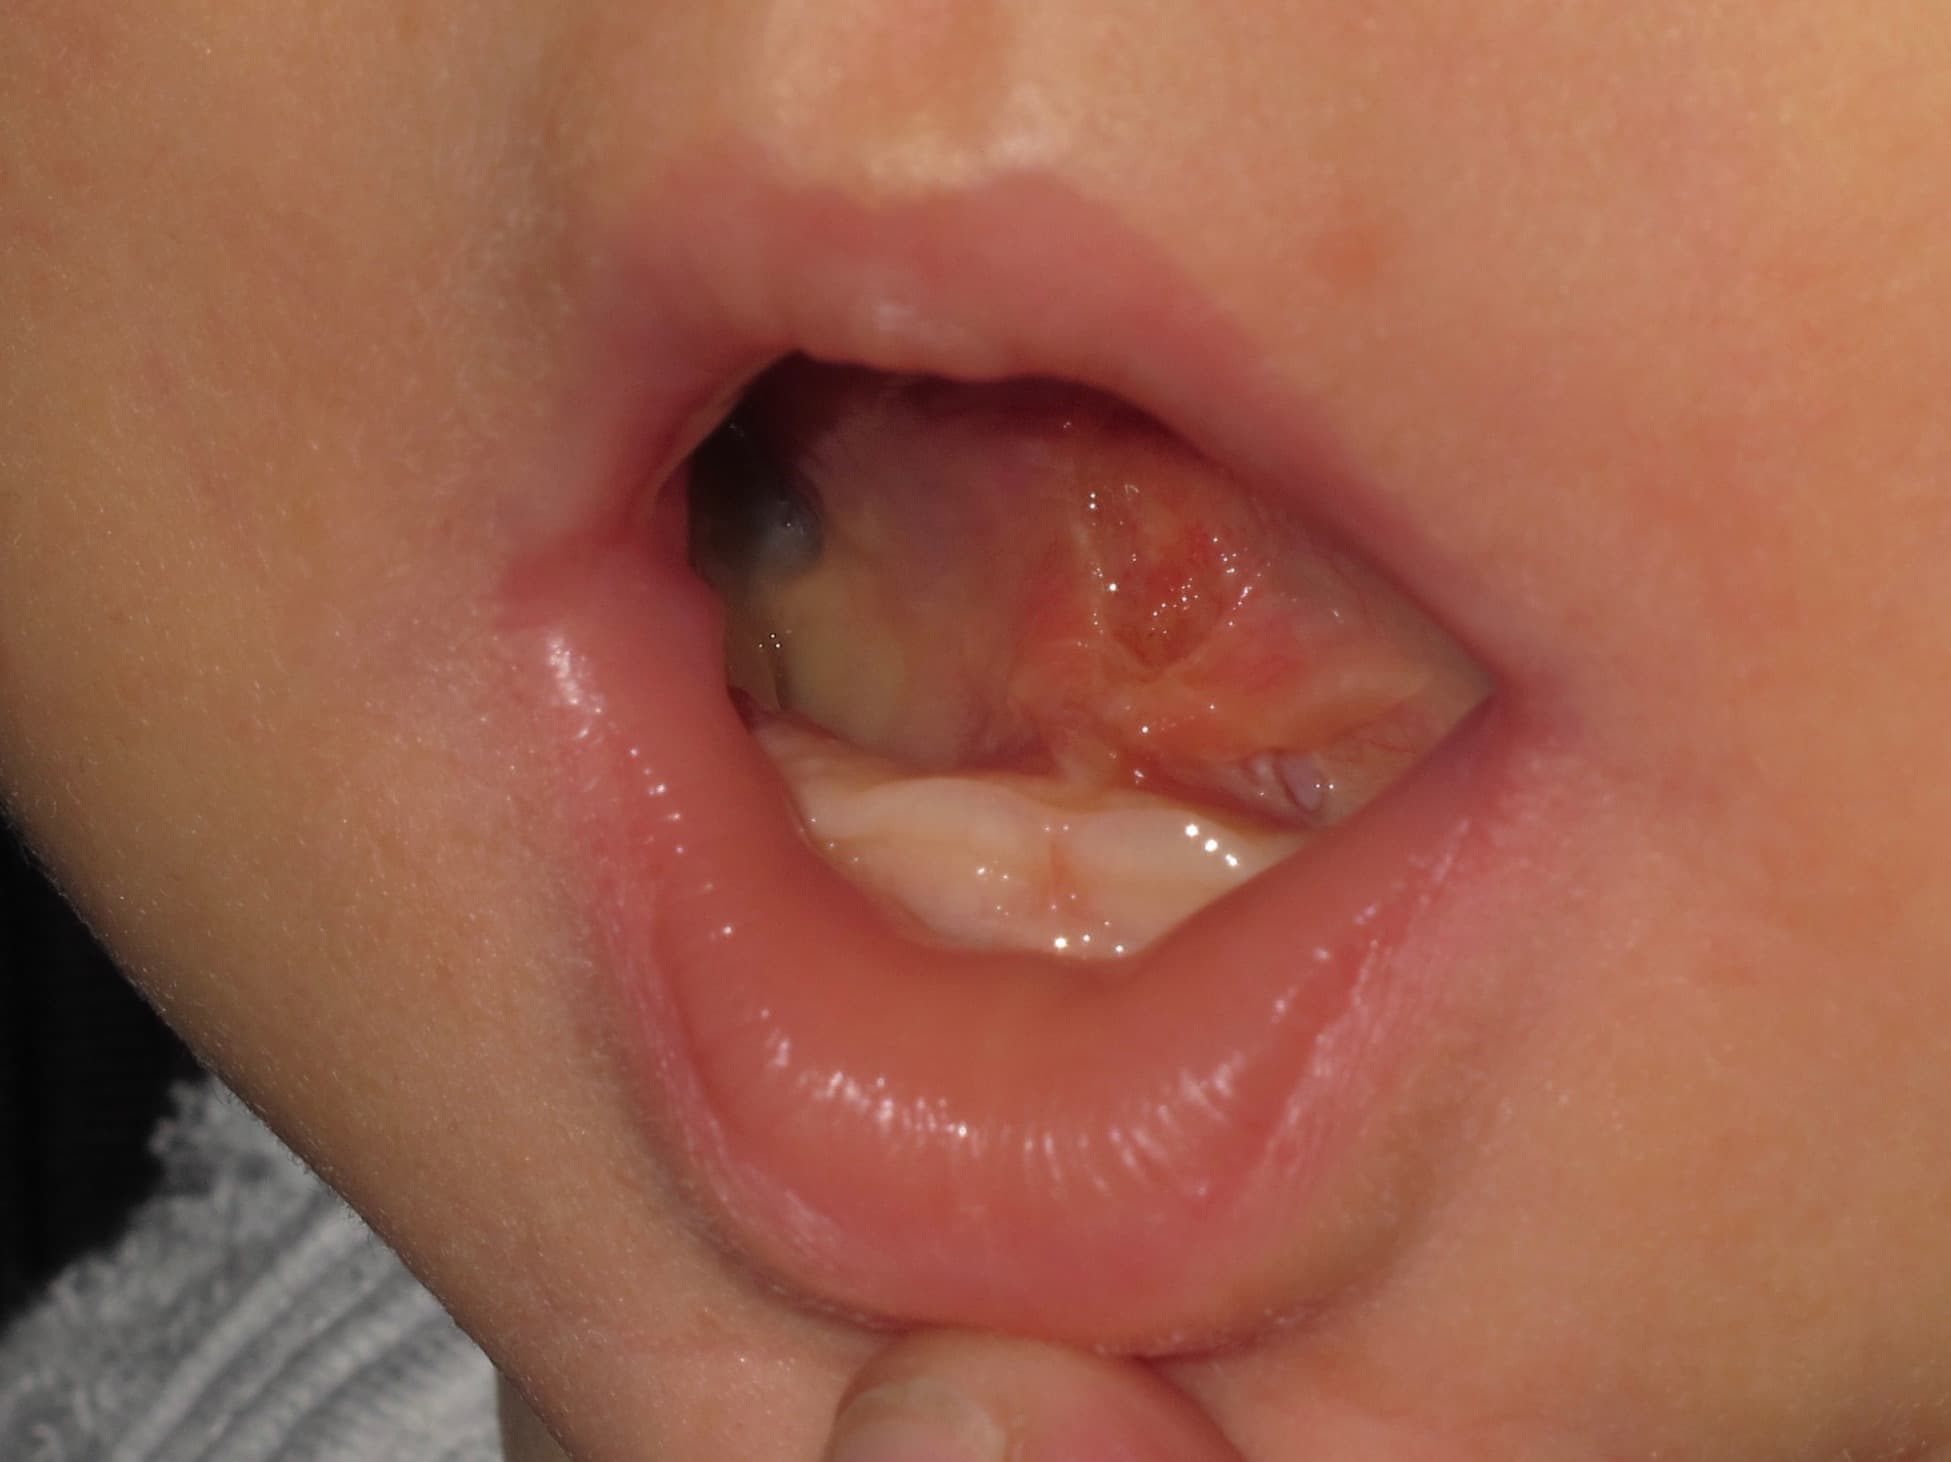 Anterior Tongue Tie in Baby after laser therapy